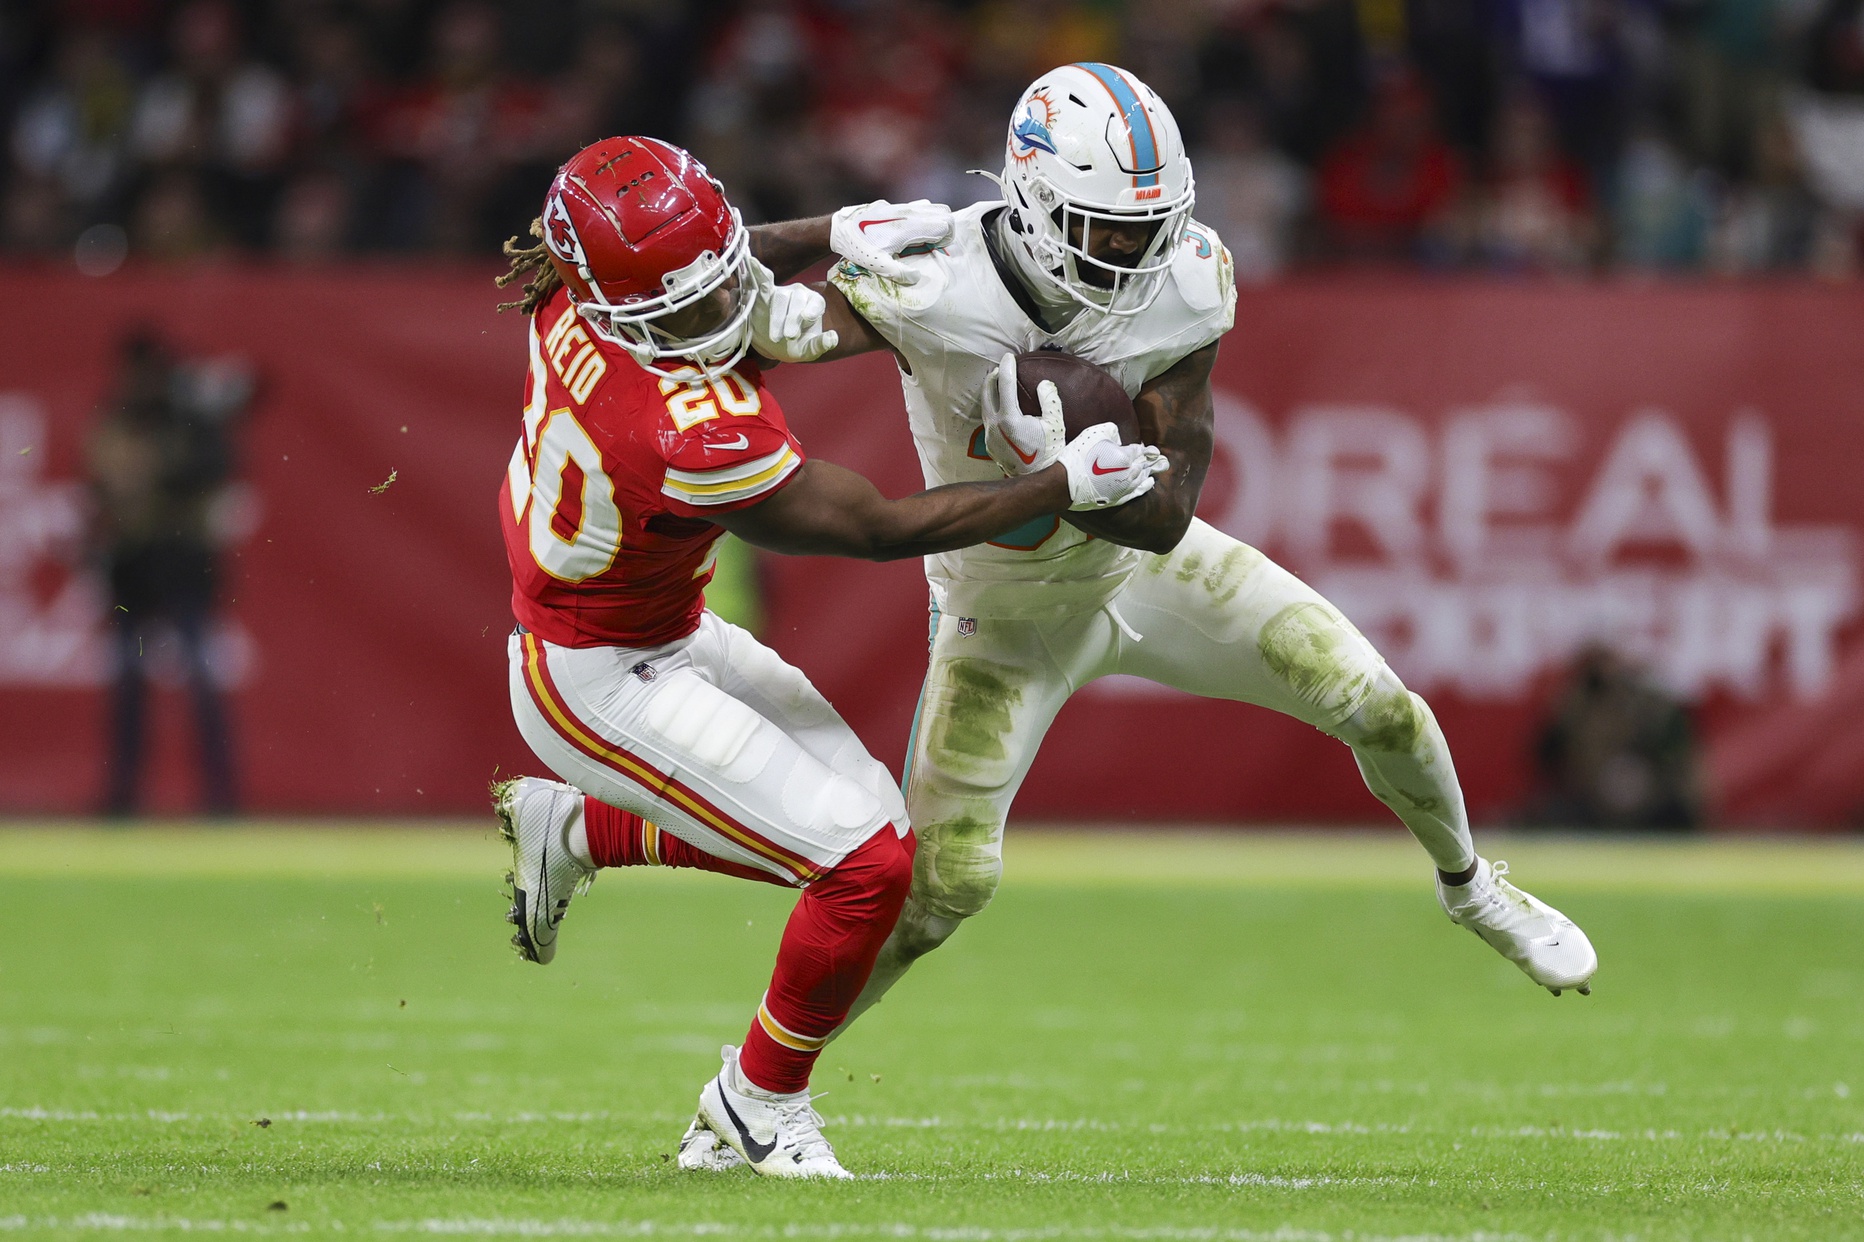 After beating Miami, here's who the Chiefs could play next week